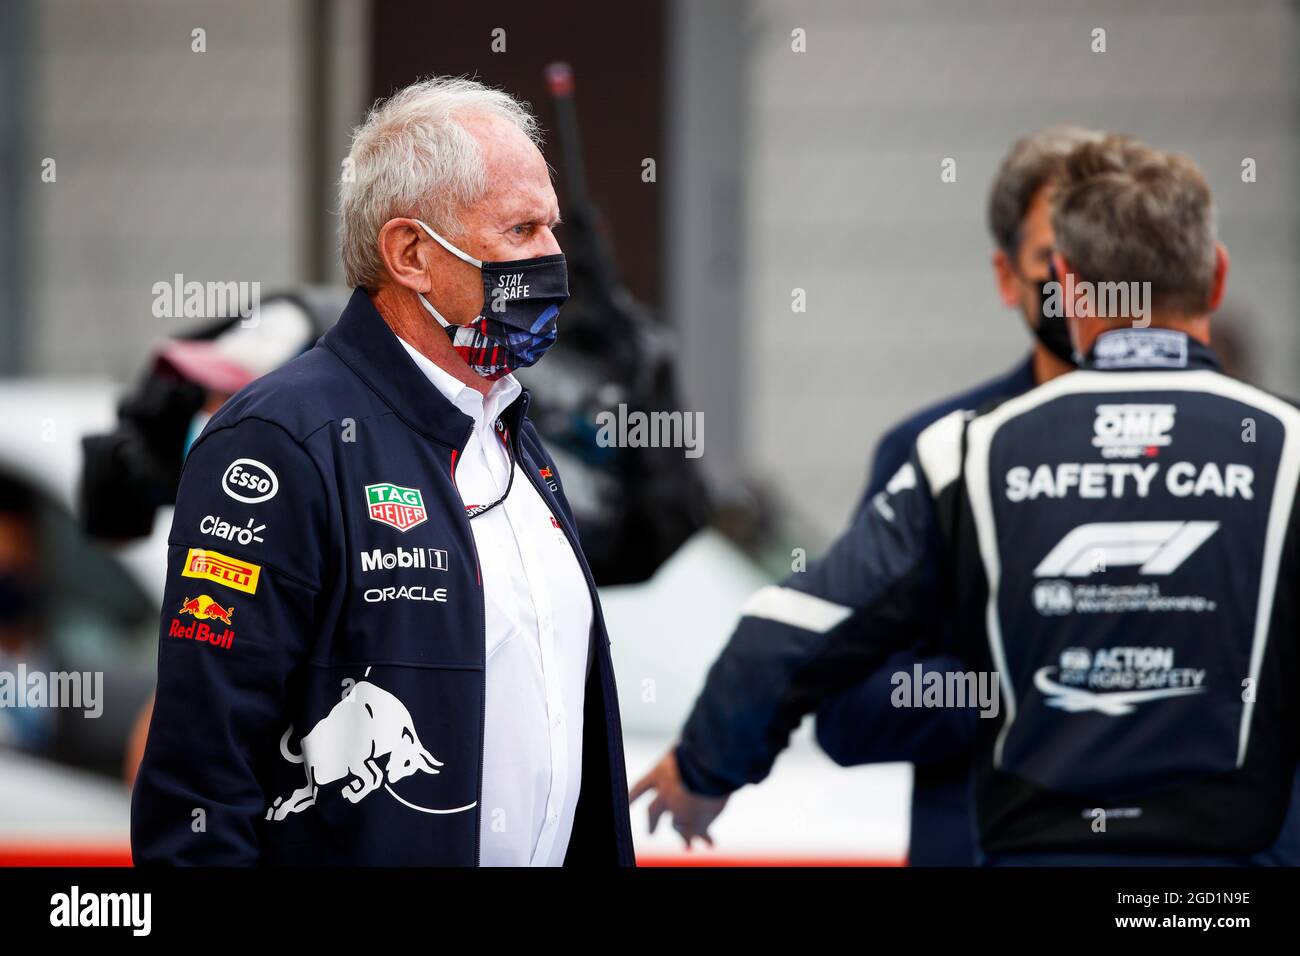 Dr Helmut Marko (AUT) Red Bull Motorsport Consultant on the grid. French Grand Prix, Sunday 20th June 2021. Paul Ricard, France. FIA Pool Image for Editorial Use Only Stock Photo